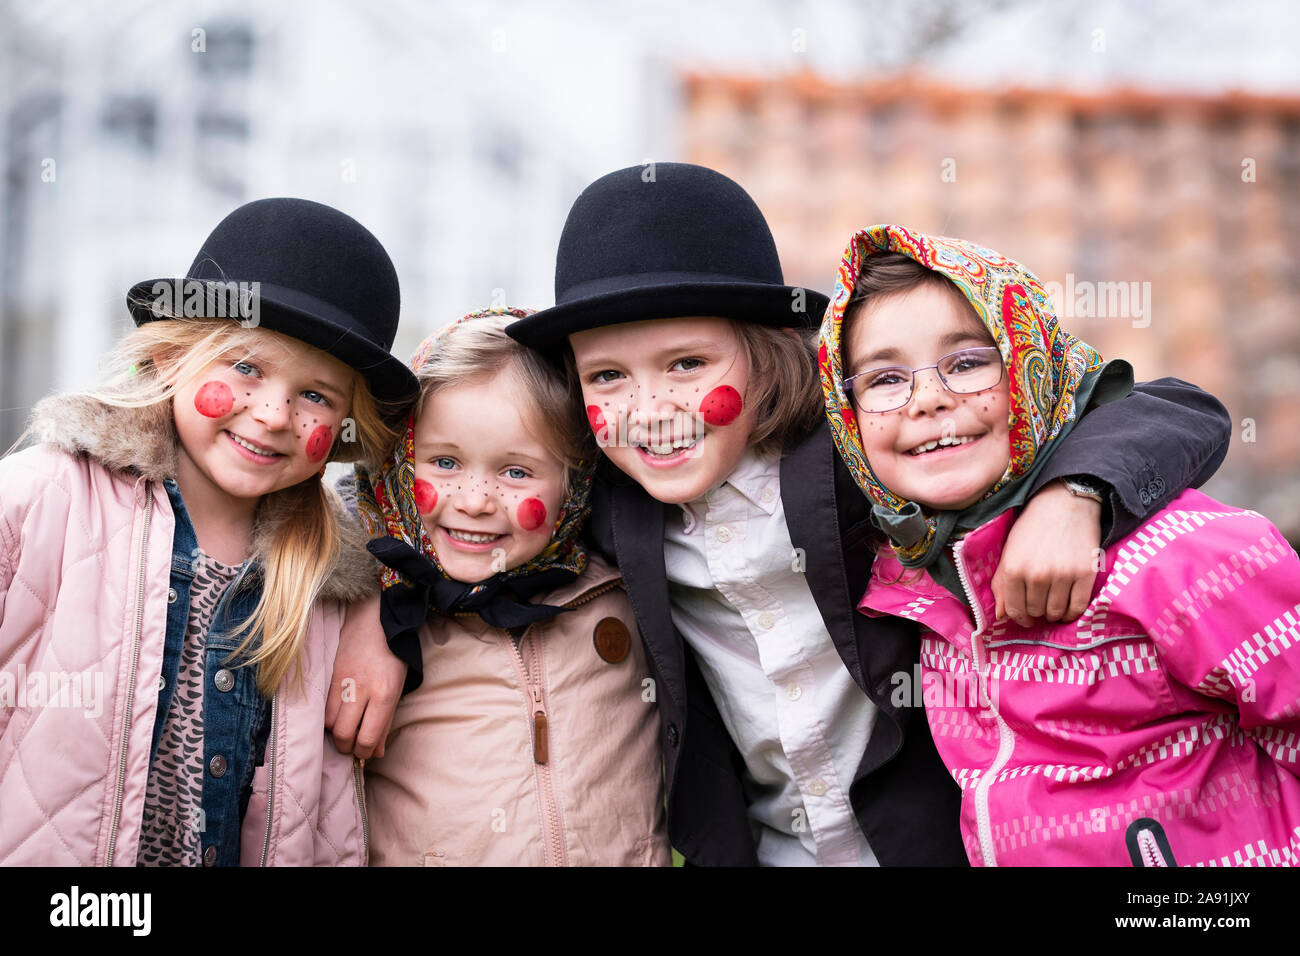 Girls dressed up as Easter witches Stock Photo